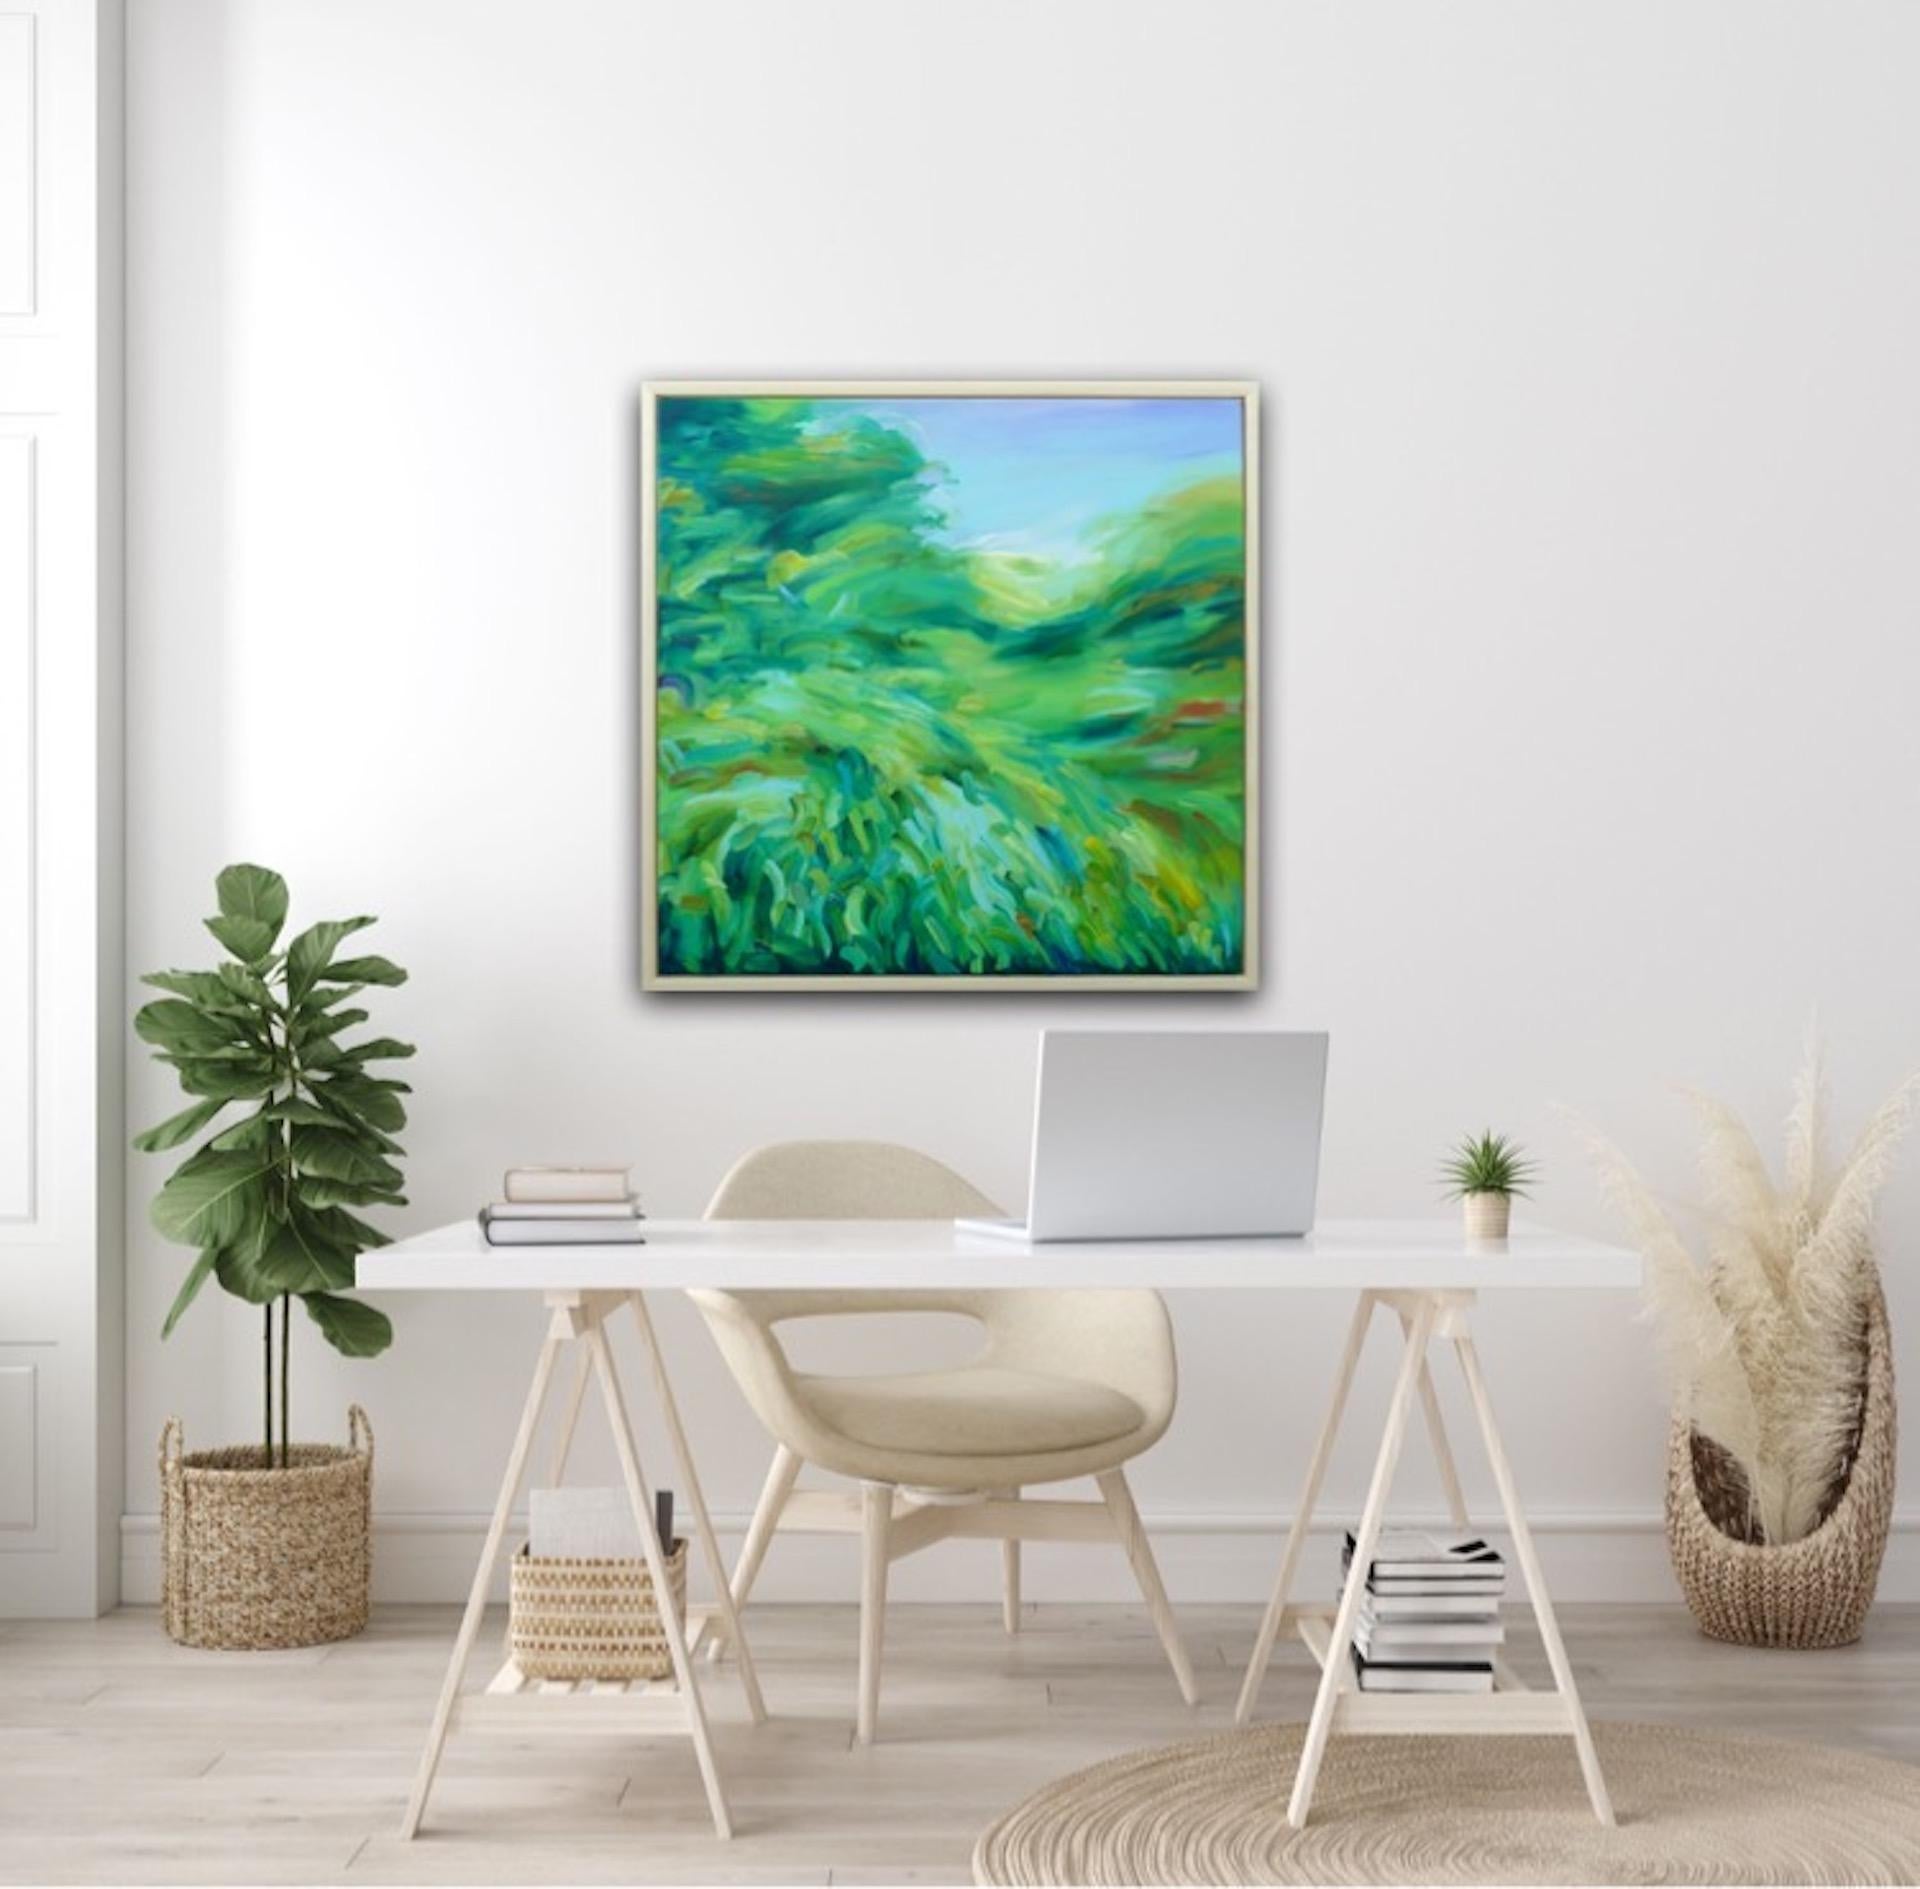 ALANNA EAKIN
The Chase
Original Abstract Landscape Painting
Acrylic On Canvas
Image Size: 70 cm x 70 cm x 4 cm
Framed Size: 75 cm x 75 cm x 5 cm
Sold Framed In A Natural Bare Wood Tray Frame
Free Shipping
Please note that in situ images are purely